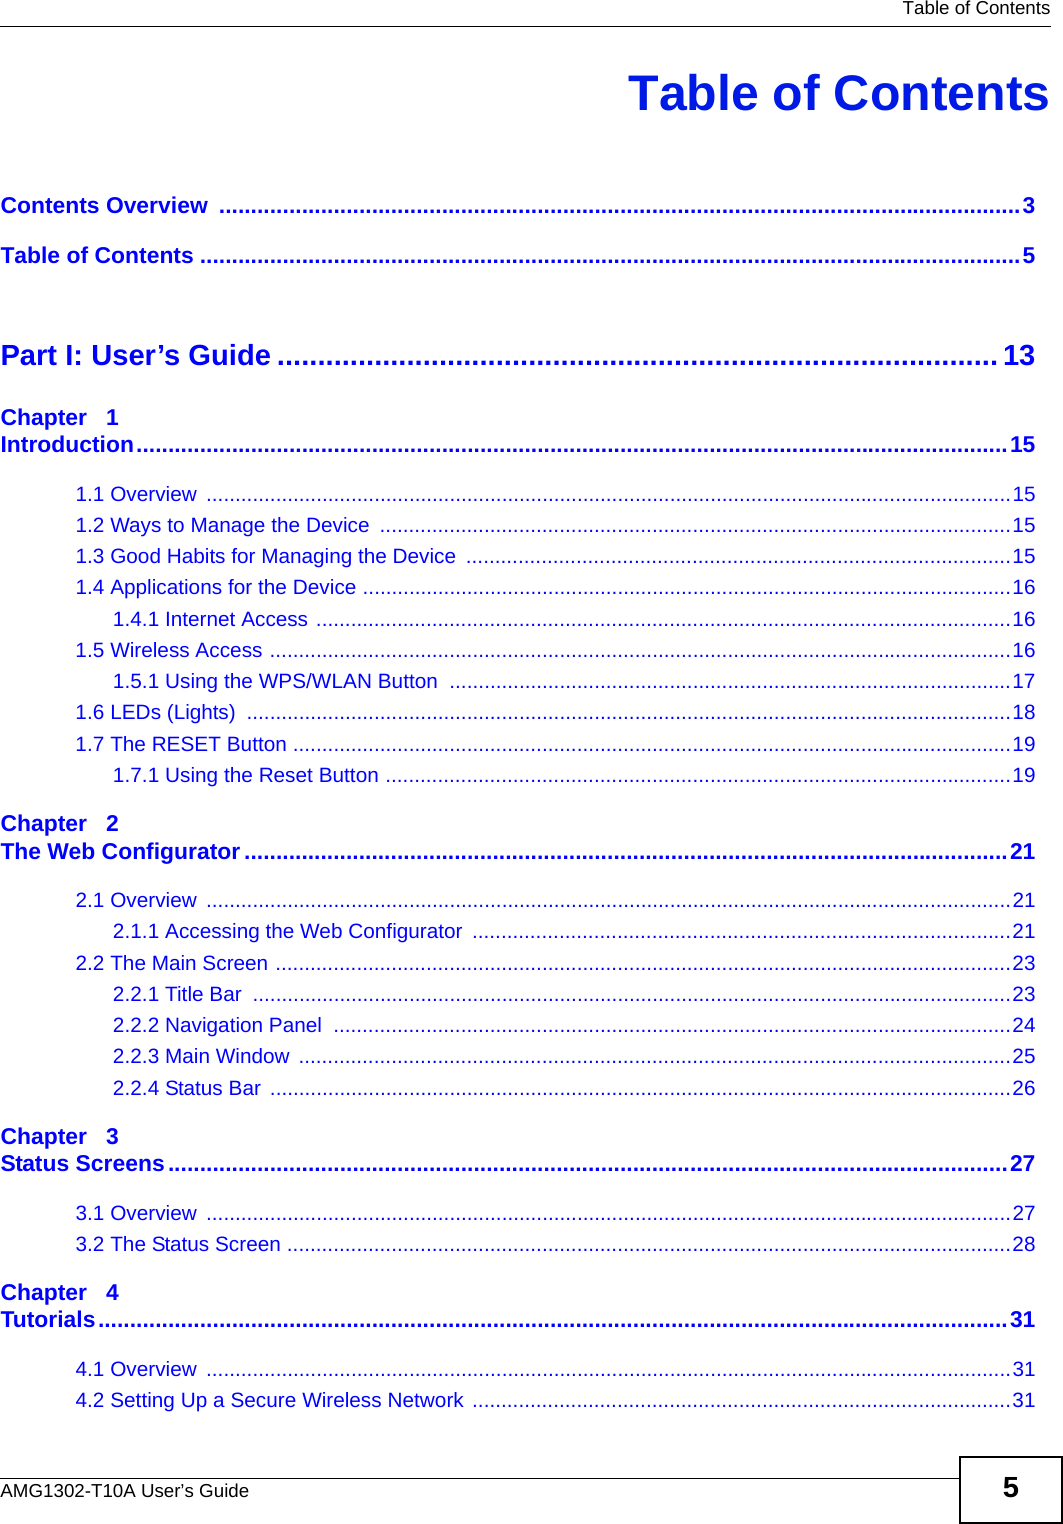   Table of ContentsAMG1302-T10A User’s Guide 5Table of ContentsContents Overview  ..............................................................................................................................3Table of Contents .................................................................................................................................5Part I: User’s Guide ......................................................................................... 13Chapter   1Introduction.........................................................................................................................................151.1 Overview  ...........................................................................................................................................151.2 Ways to Manage the Device  .............................................................................................................151.3 Good Habits for Managing the Device  ..............................................................................................151.4 Applications for the Device ................................................................................................................161.4.1 Internet Access ........................................................................................................................161.5 Wireless Access ................................................................................................................................161.5.1 Using the WPS/WLAN Button  .................................................................................................171.6 LEDs (Lights)  ....................................................................................................................................181.7 The RESET Button ............................................................................................................................191.7.1 Using the Reset Button ............................................................................................................19Chapter   2The Web Configurator........................................................................................................................212.1 Overview  ...........................................................................................................................................212.1.1 Accessing the Web Configurator  .............................................................................................212.2 The Main Screen ...............................................................................................................................232.2.1 Title Bar  ...................................................................................................................................232.2.2 Navigation Panel  .....................................................................................................................242.2.3 Main Window  ...........................................................................................................................252.2.4 Status Bar ................................................................................................................................26Chapter   3Status Screens....................................................................................................................................273.1 Overview  ...........................................................................................................................................273.2 The Status Screen .............................................................................................................................28Chapter   4Tutorials...............................................................................................................................................314.1 Overview  ...........................................................................................................................................314.2 Setting Up a Secure Wireless Network .............................................................................................31